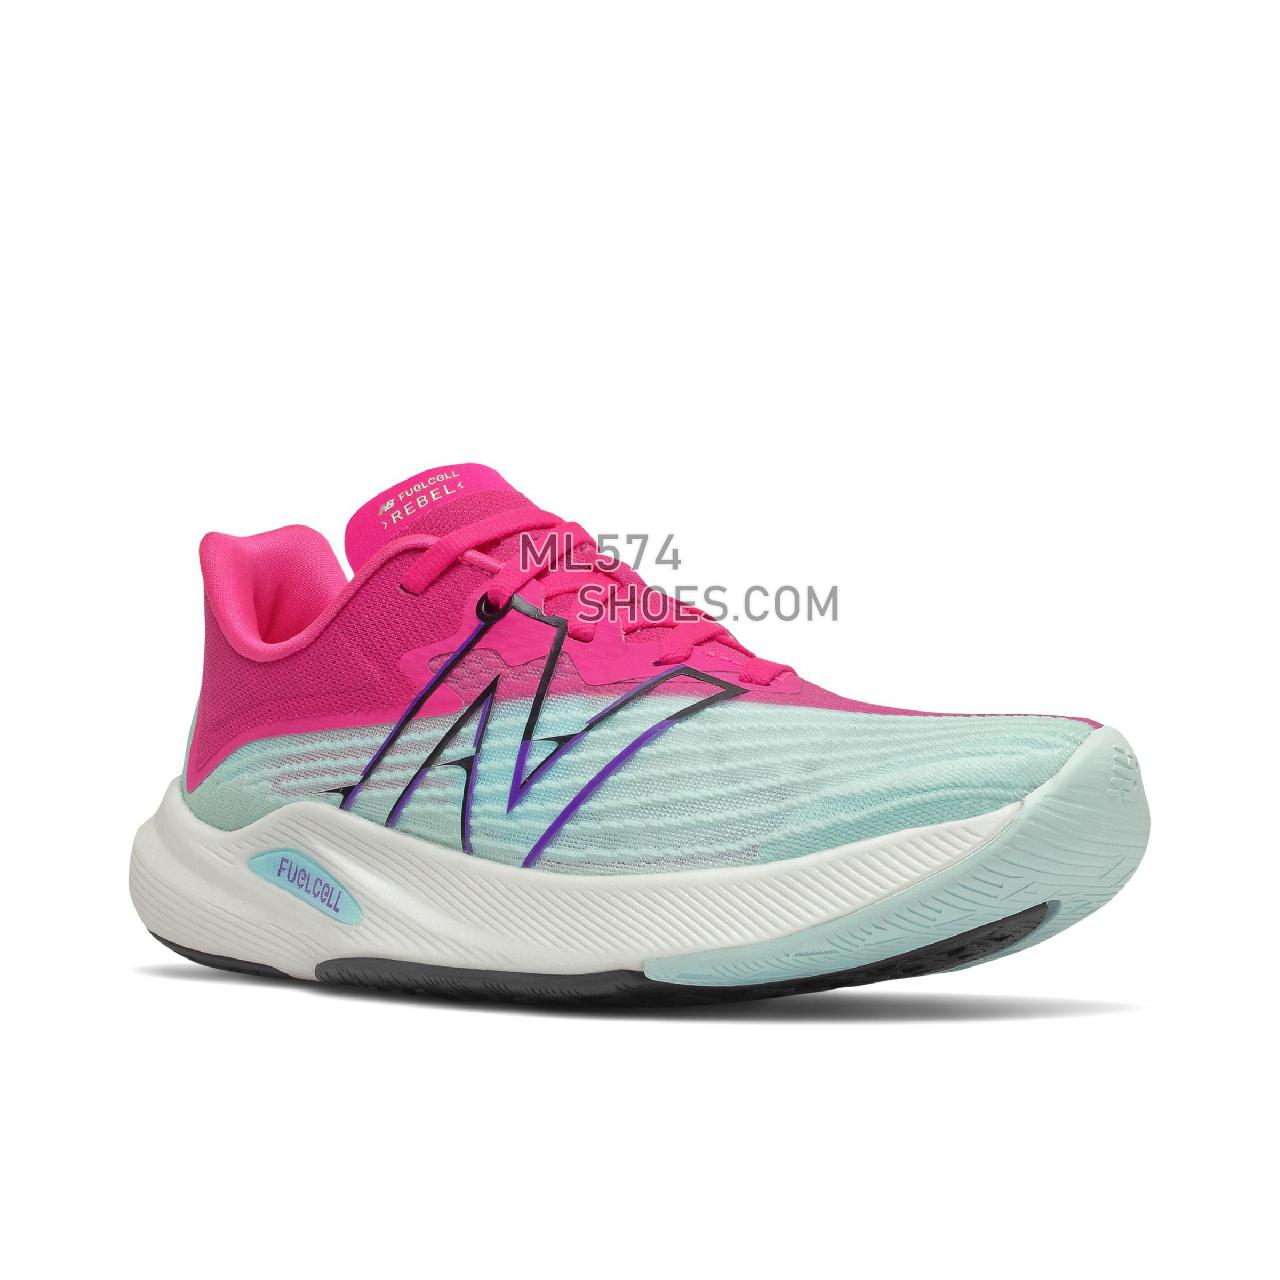 New Balance FuelCell Rebel v2 - Women's Neutral Running - Pale Blue Chill with Pink Glo - WFCXCP2